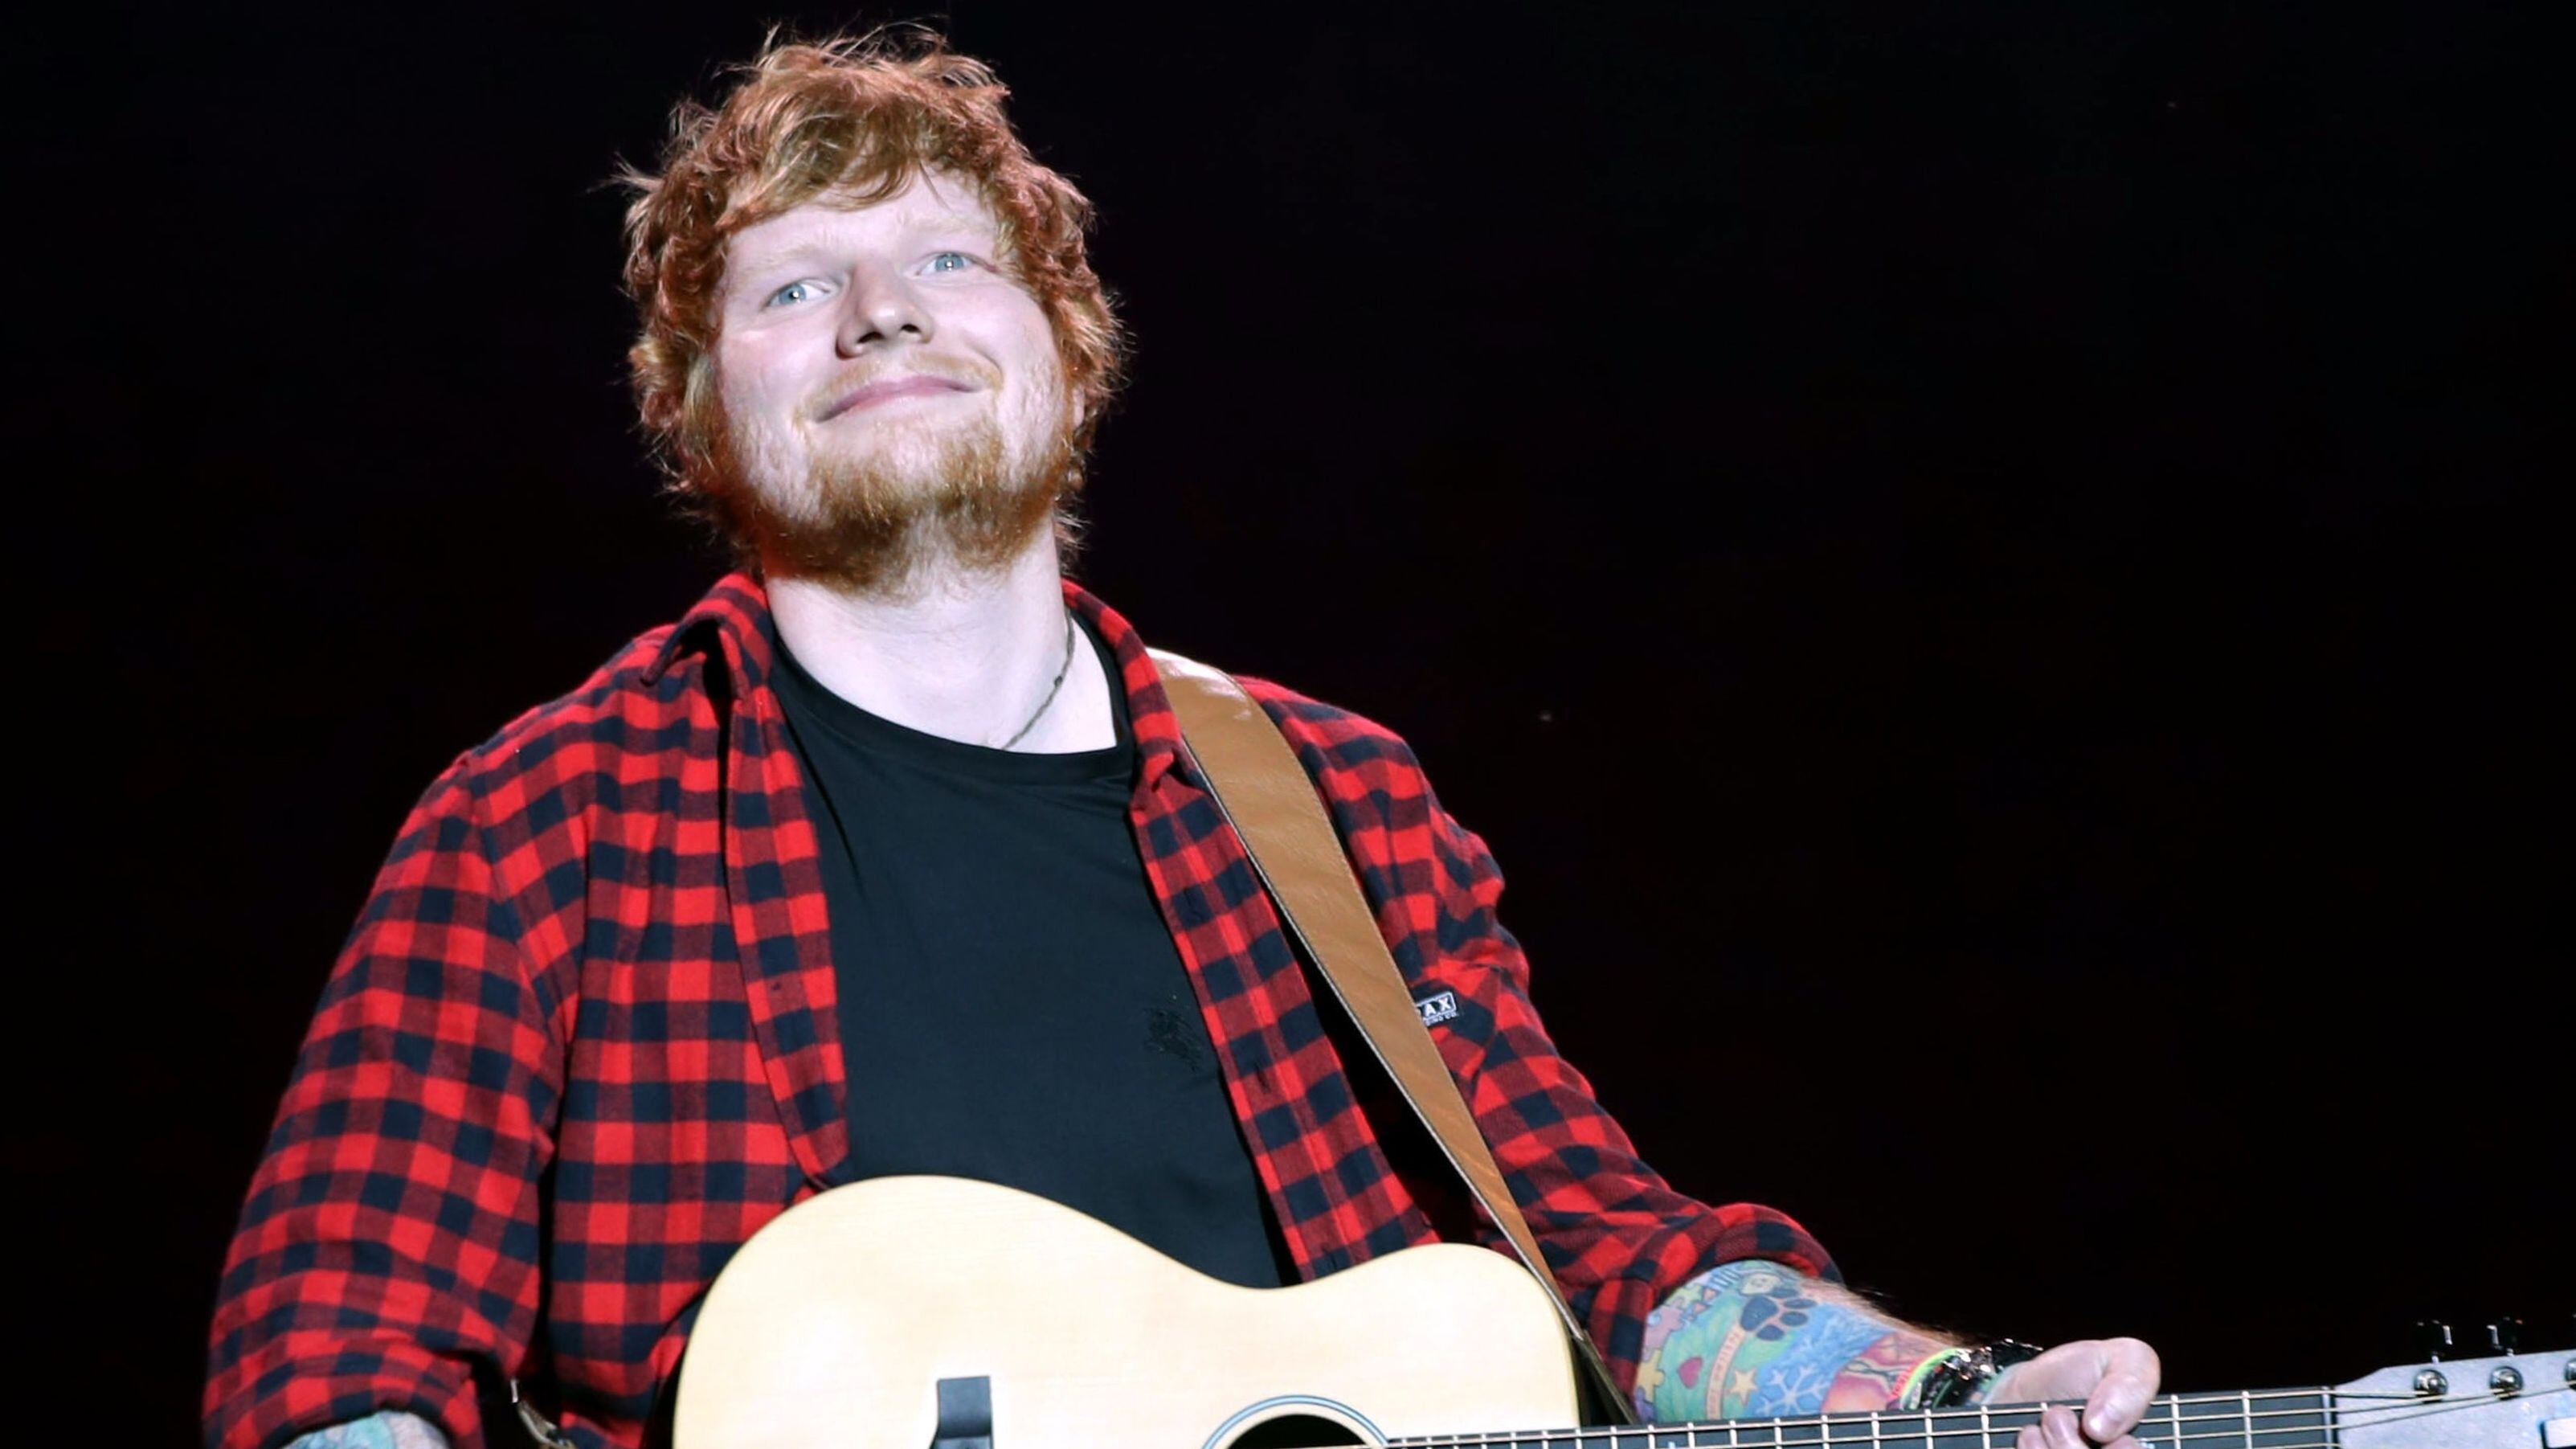 Ed Sheeran’s tour will include two shows at Wembley Stadium.